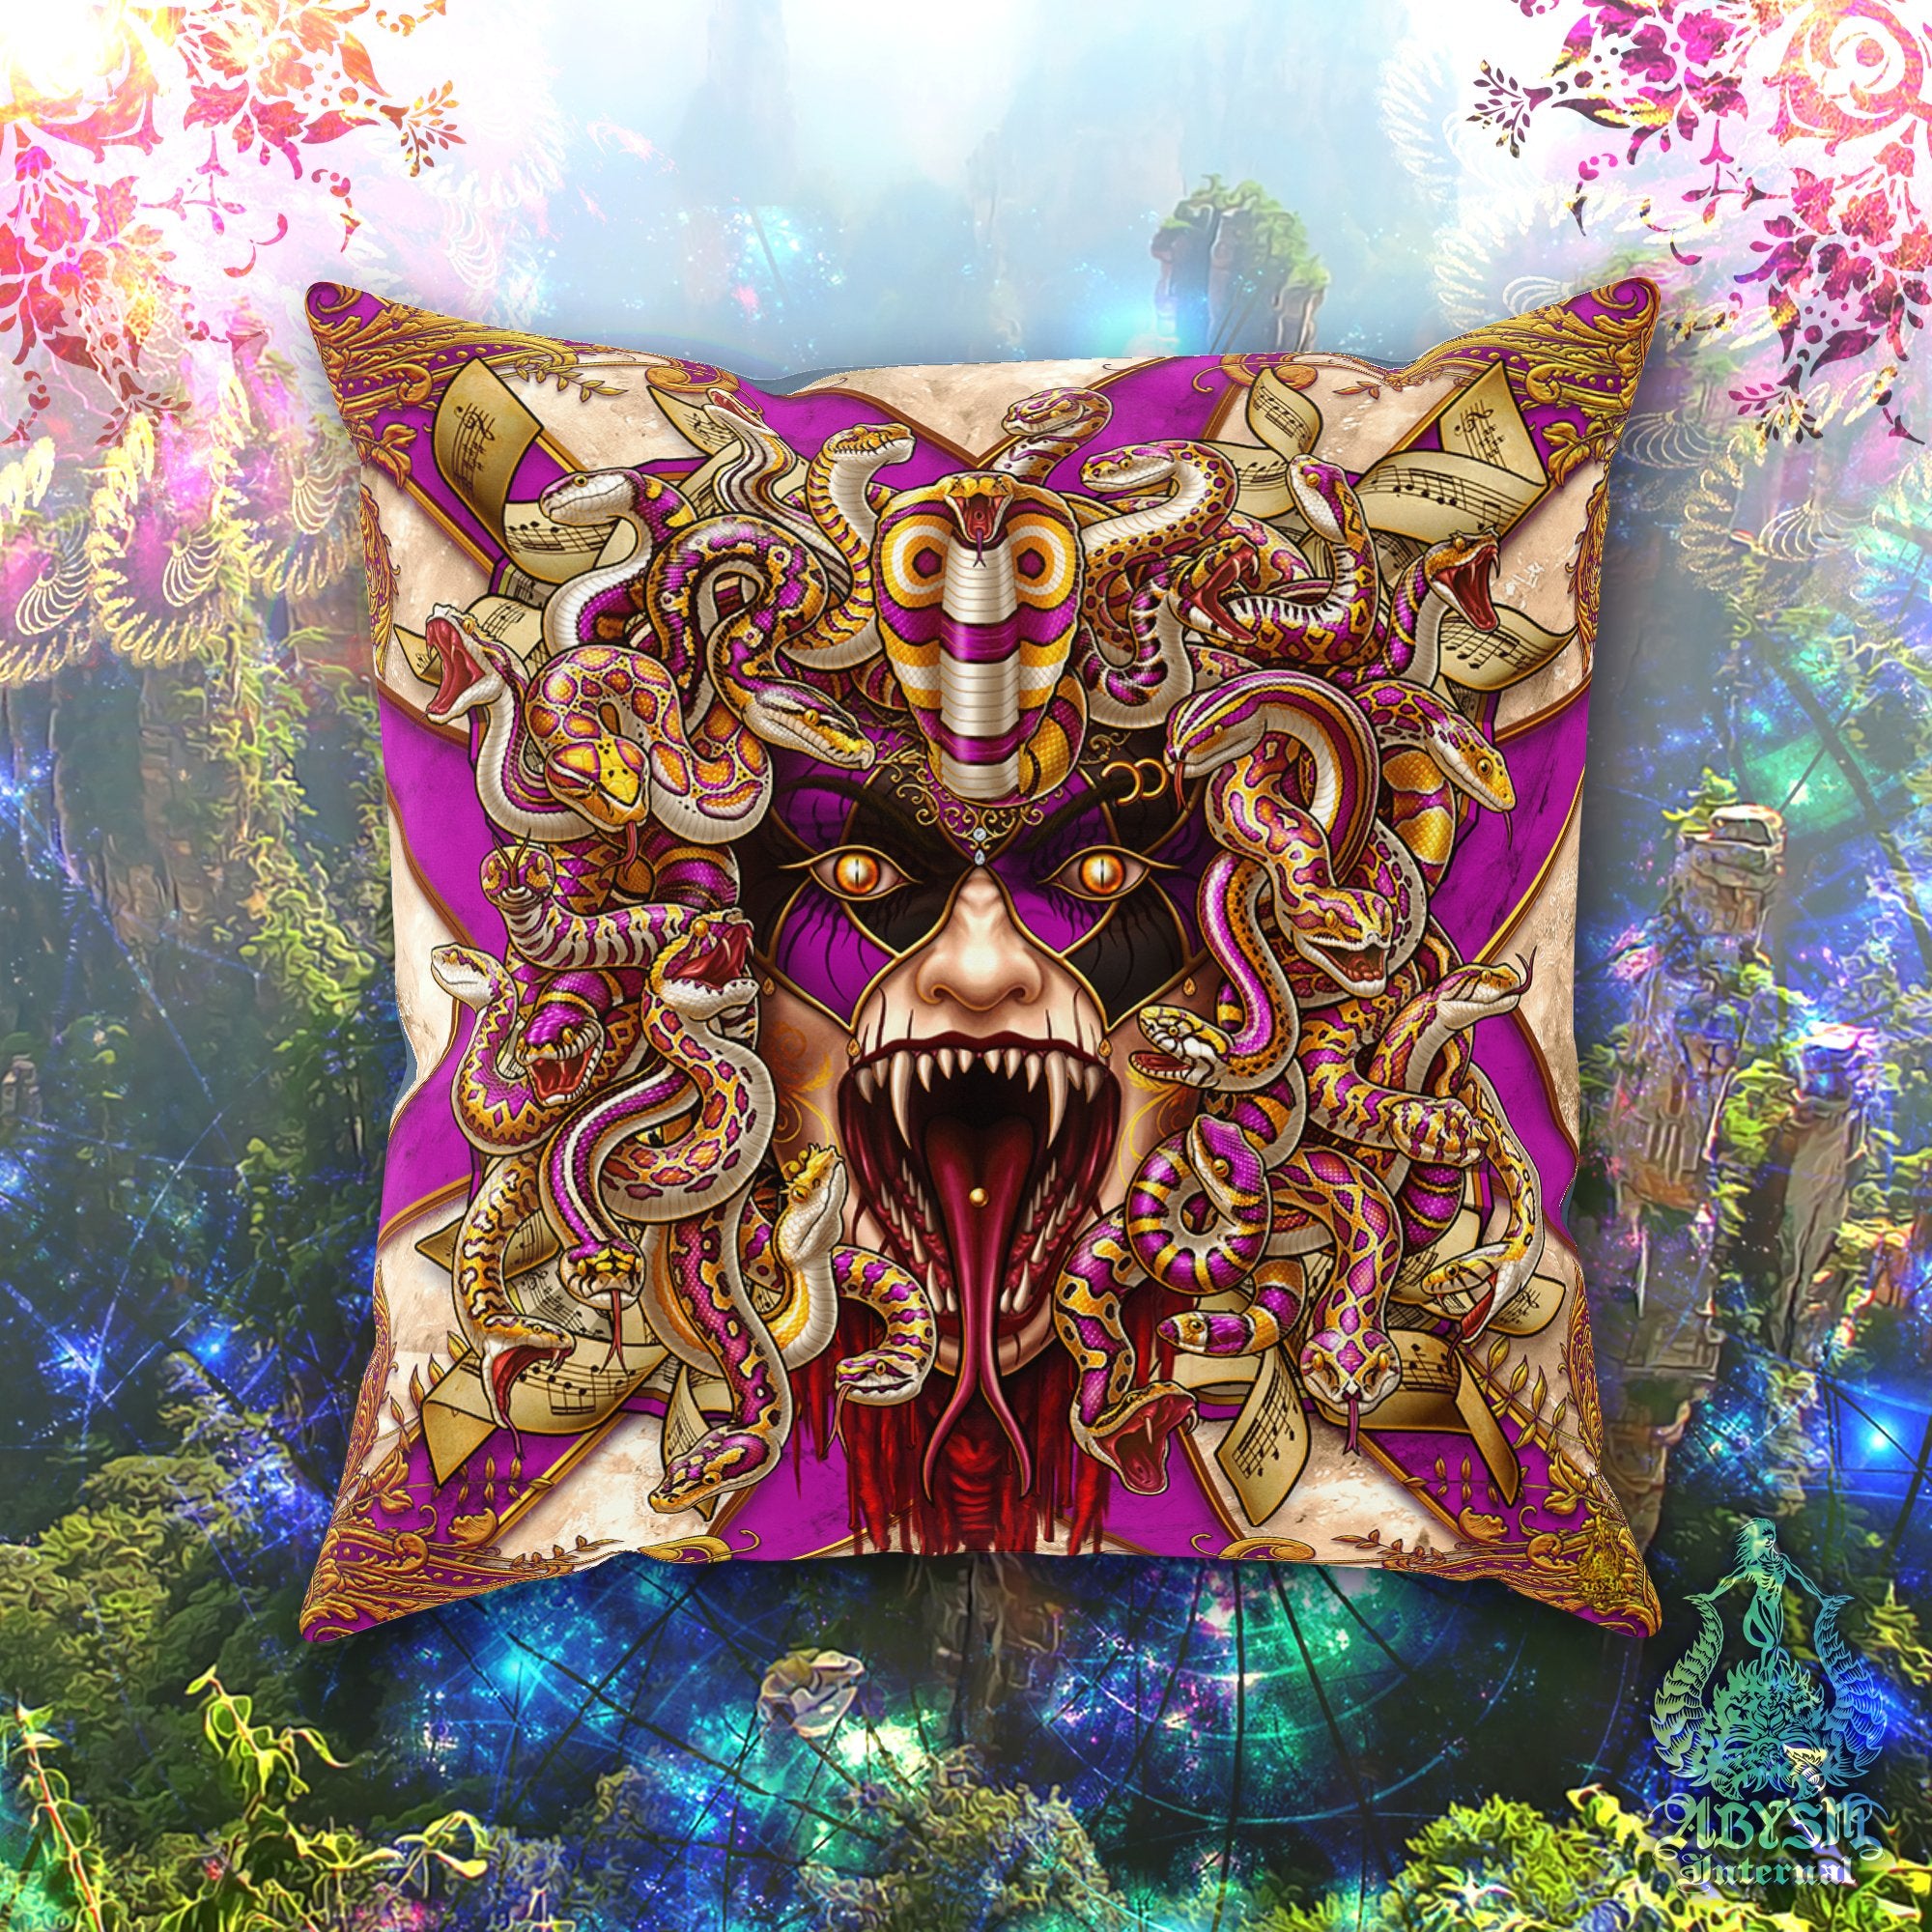 Medusa Throw Pillow, Decorative Accent Pillow, Square Cushion Cover, Gamer Room Decor, Ecclectic Home - Harlequin, 4 Faces, 7 Colors - Abysm Internal